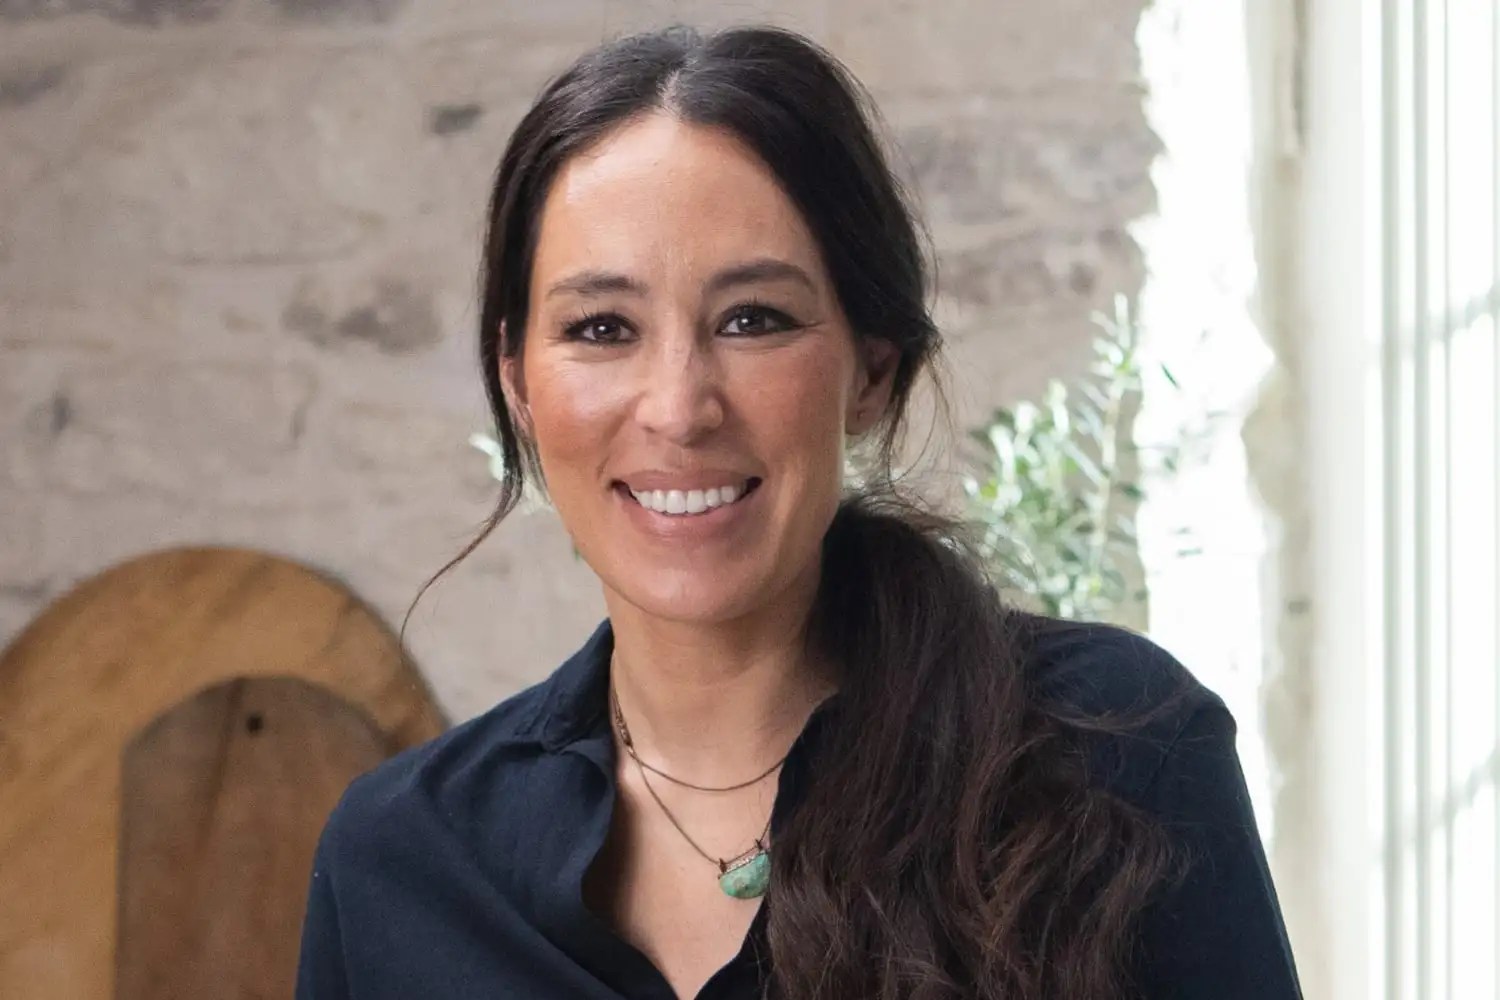 Joanna Gaines cooks in the kitchen of her discovery+ show.